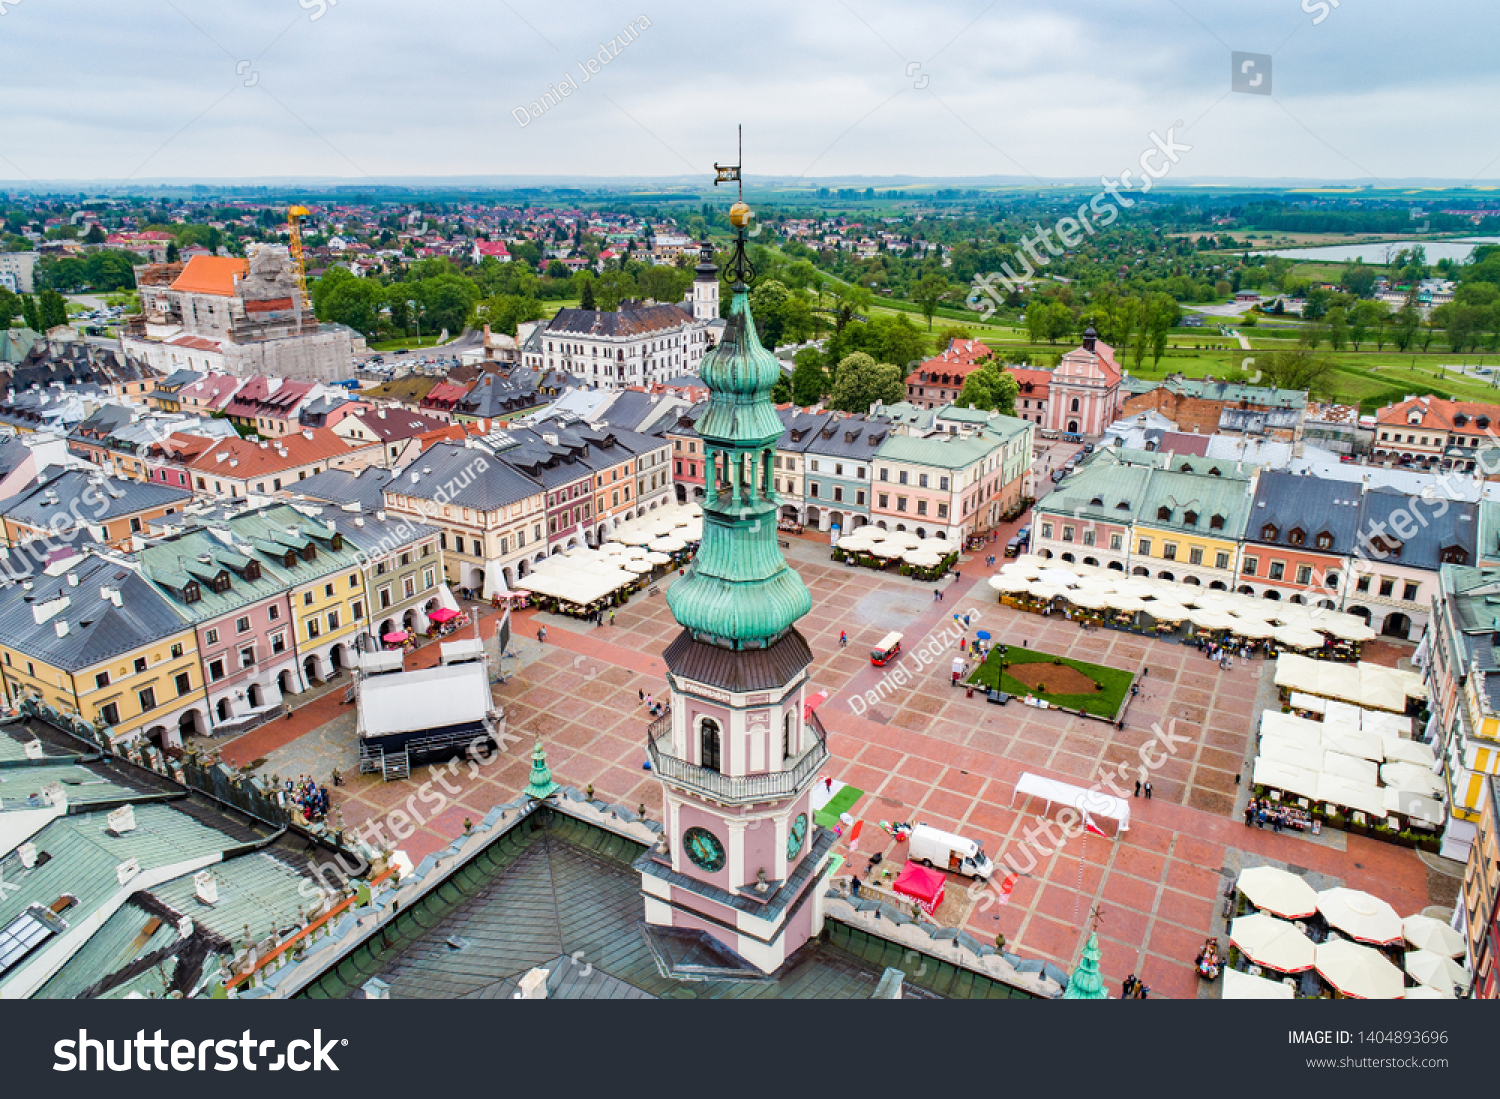 Drone view on Zamosc old town and city main square with town hall. Zamosc is a city in southeastern Poland, situated in the southern part of Lublin Voivodeship. Zamosc, Poland, Europe